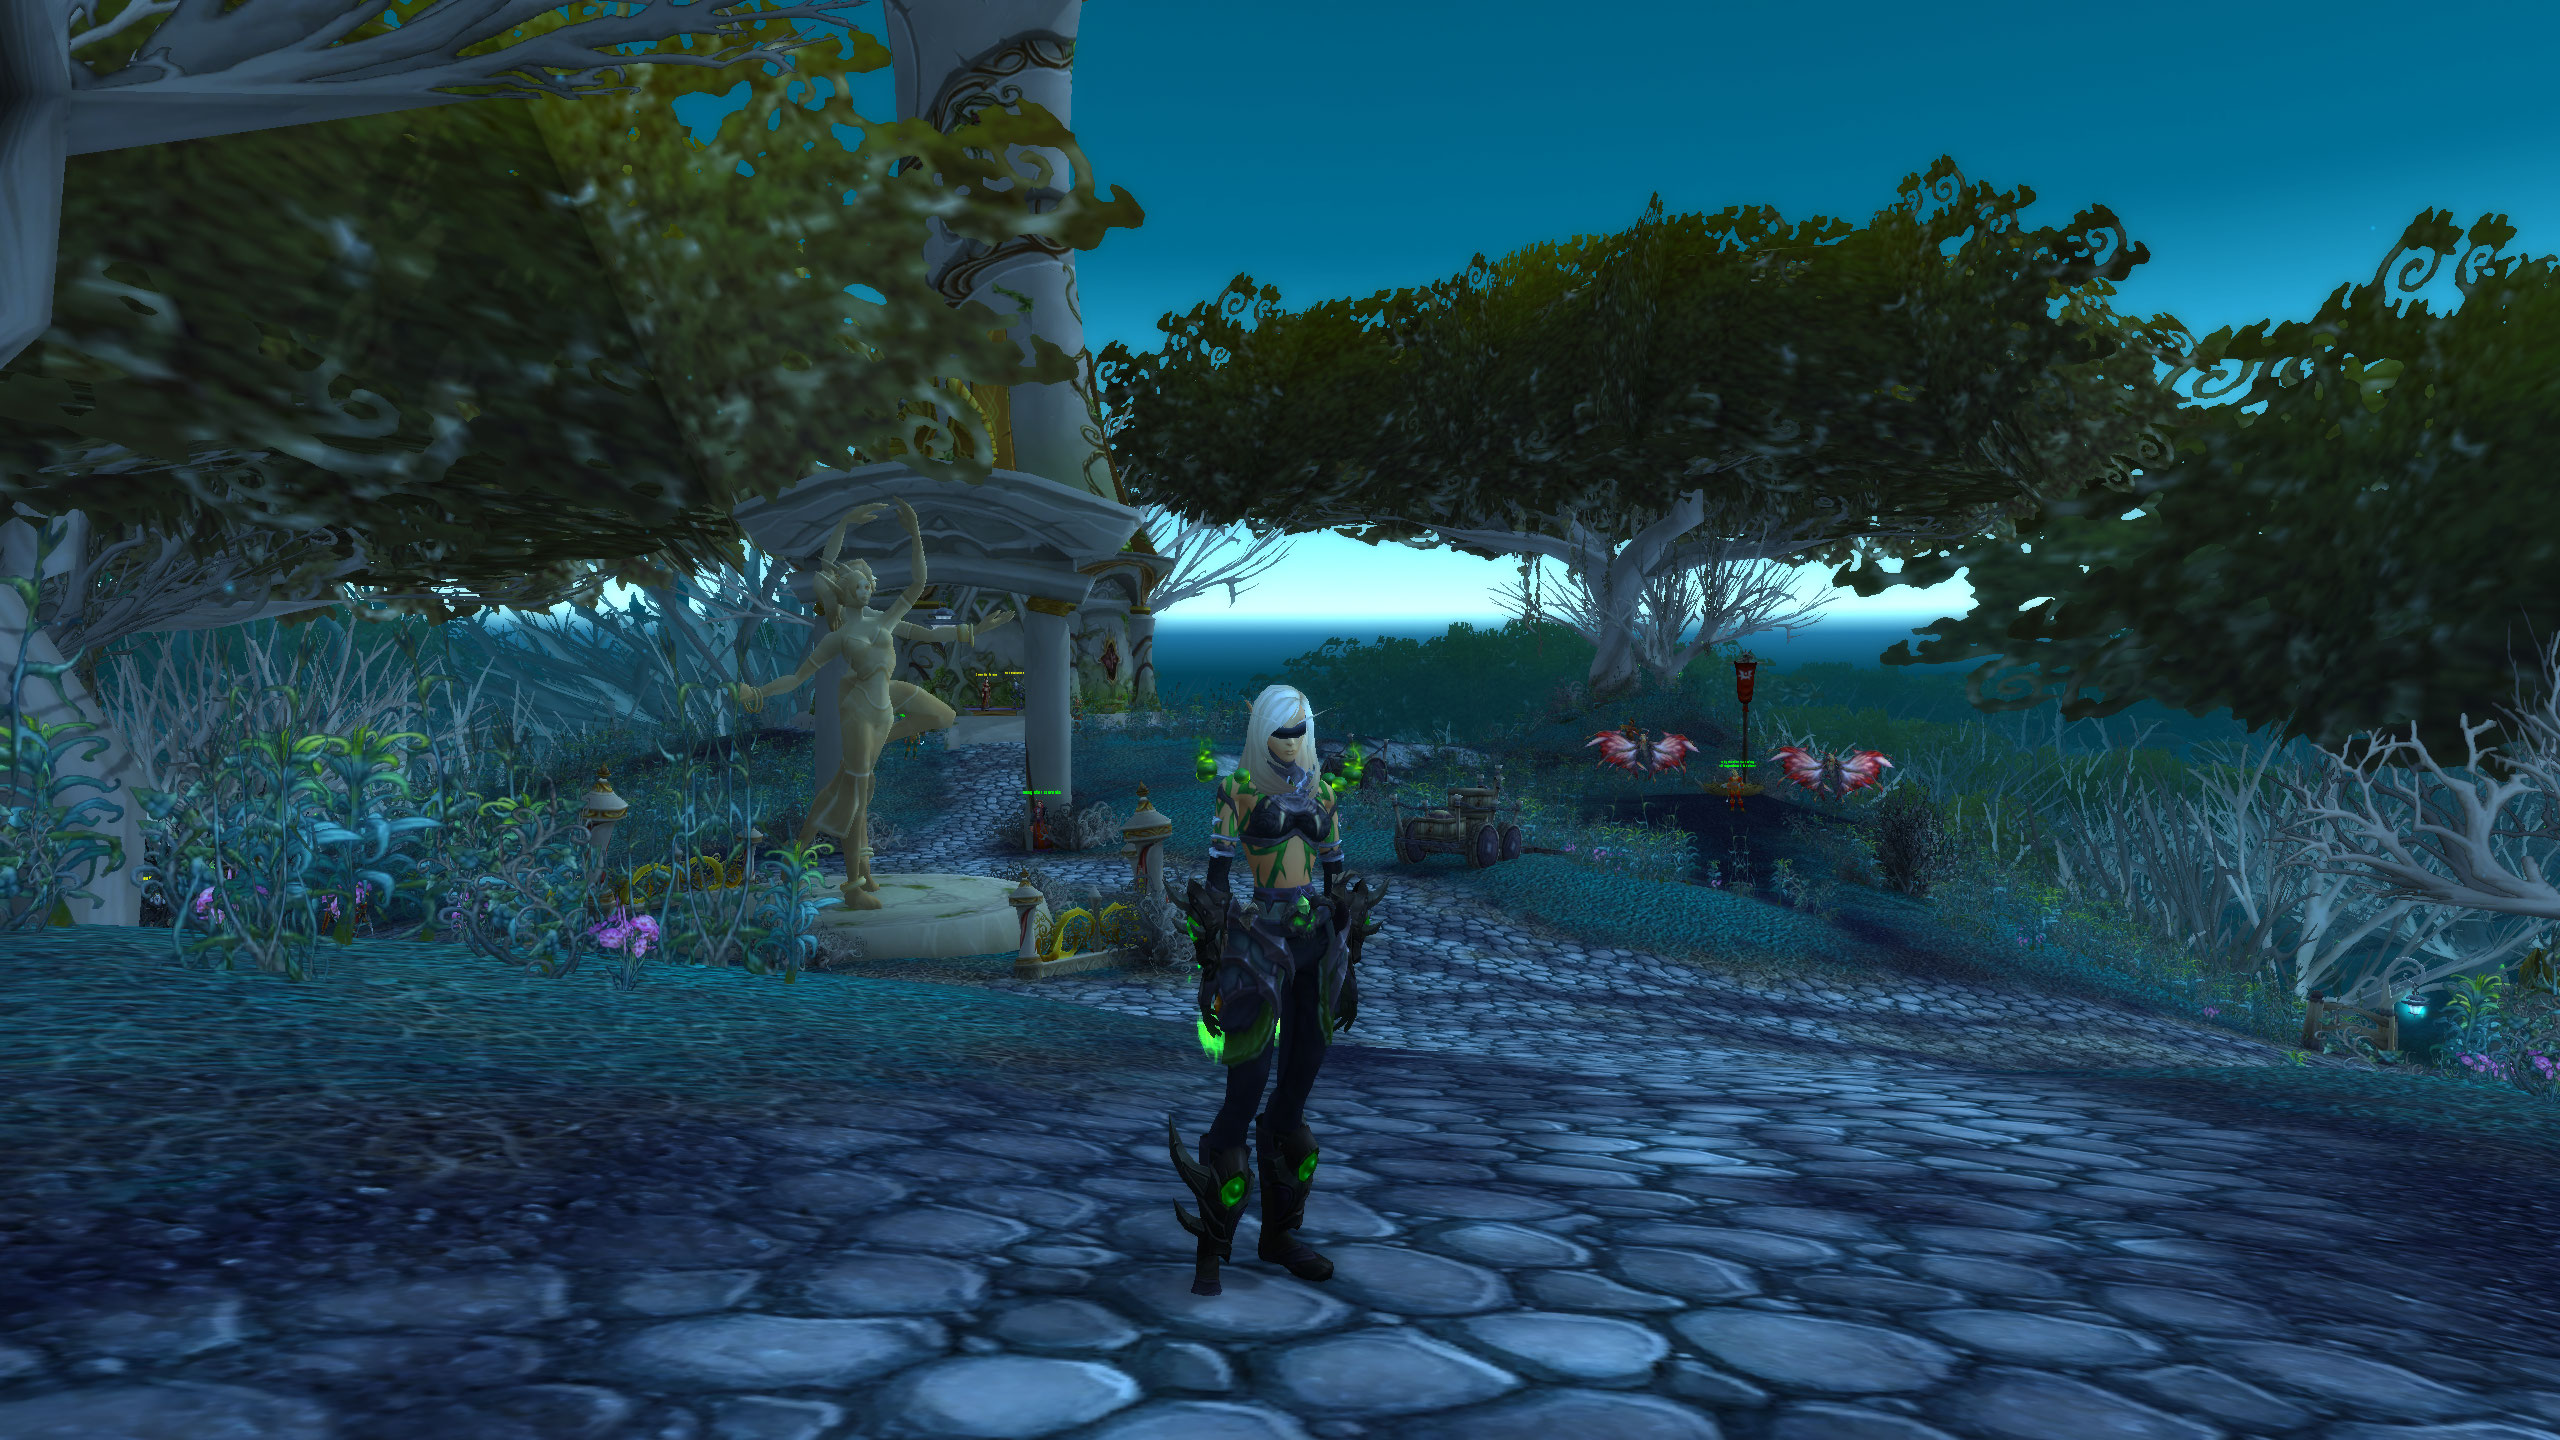 forget the war within, i'm excited to return to the home of the elves in world of warcraft: midnight